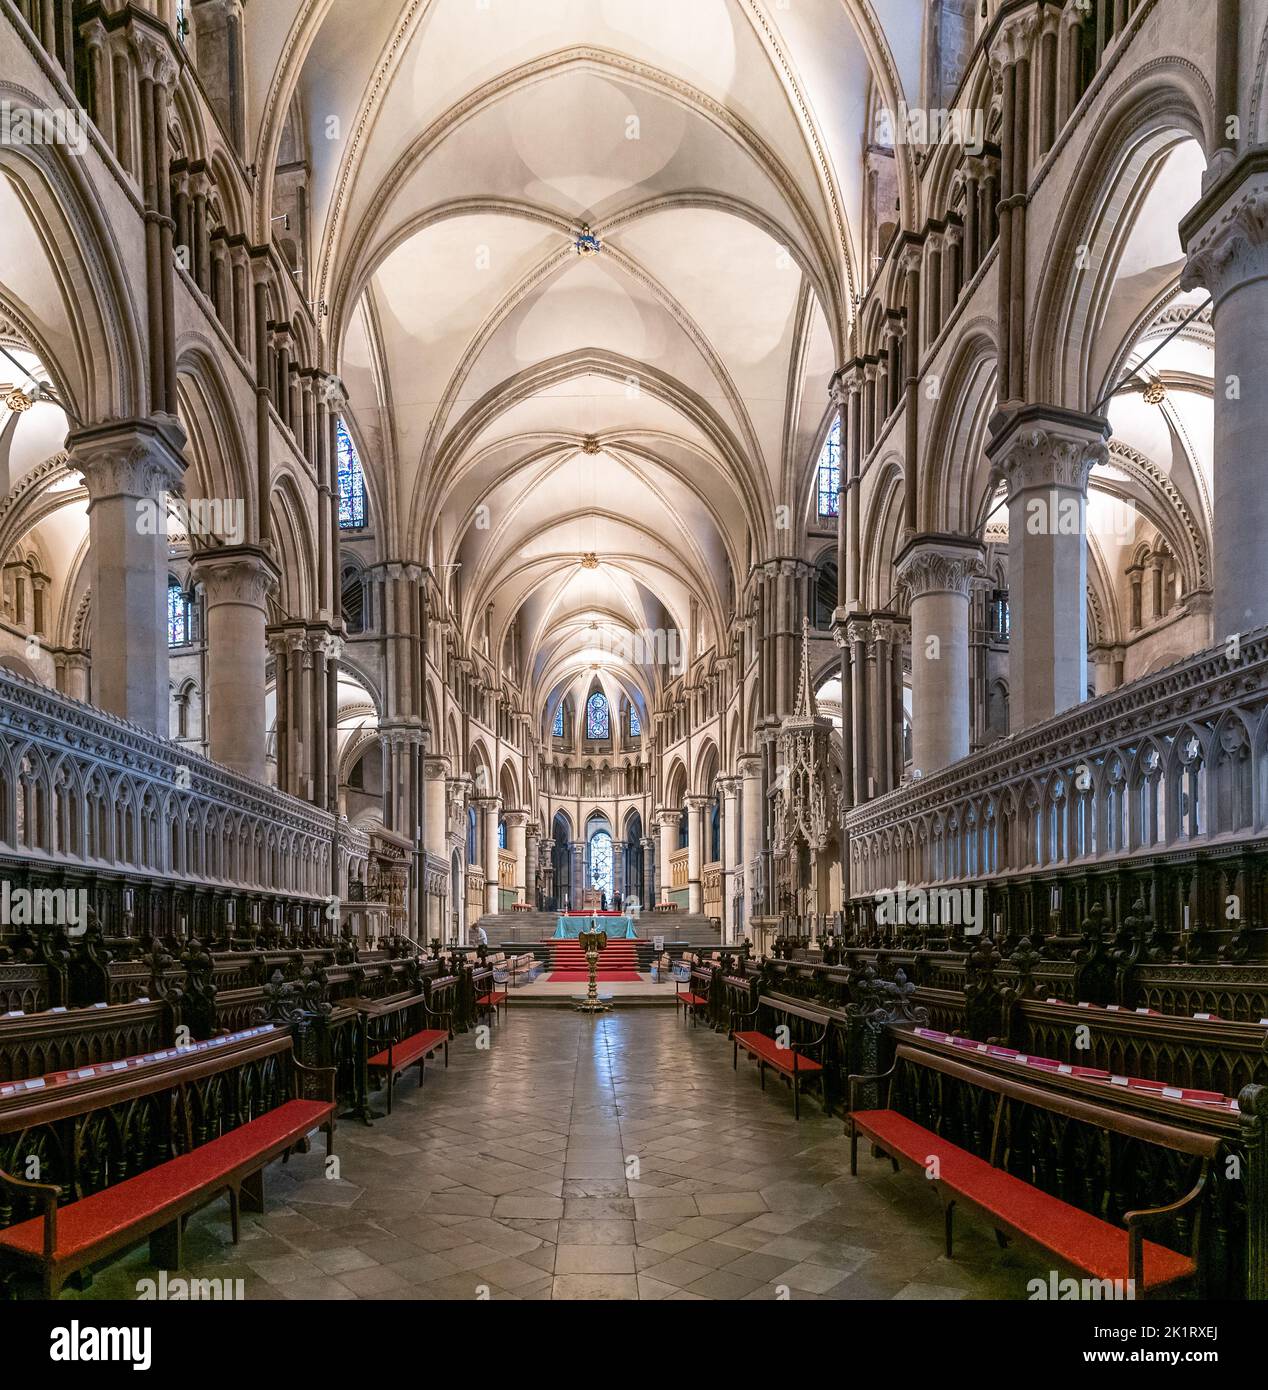 Canterbury, United Kingdom - 10 September, 2022: view of the Quire and the steps leading to the Trinity Chapel inside the historic Canterbury Cathedra Stock Photo